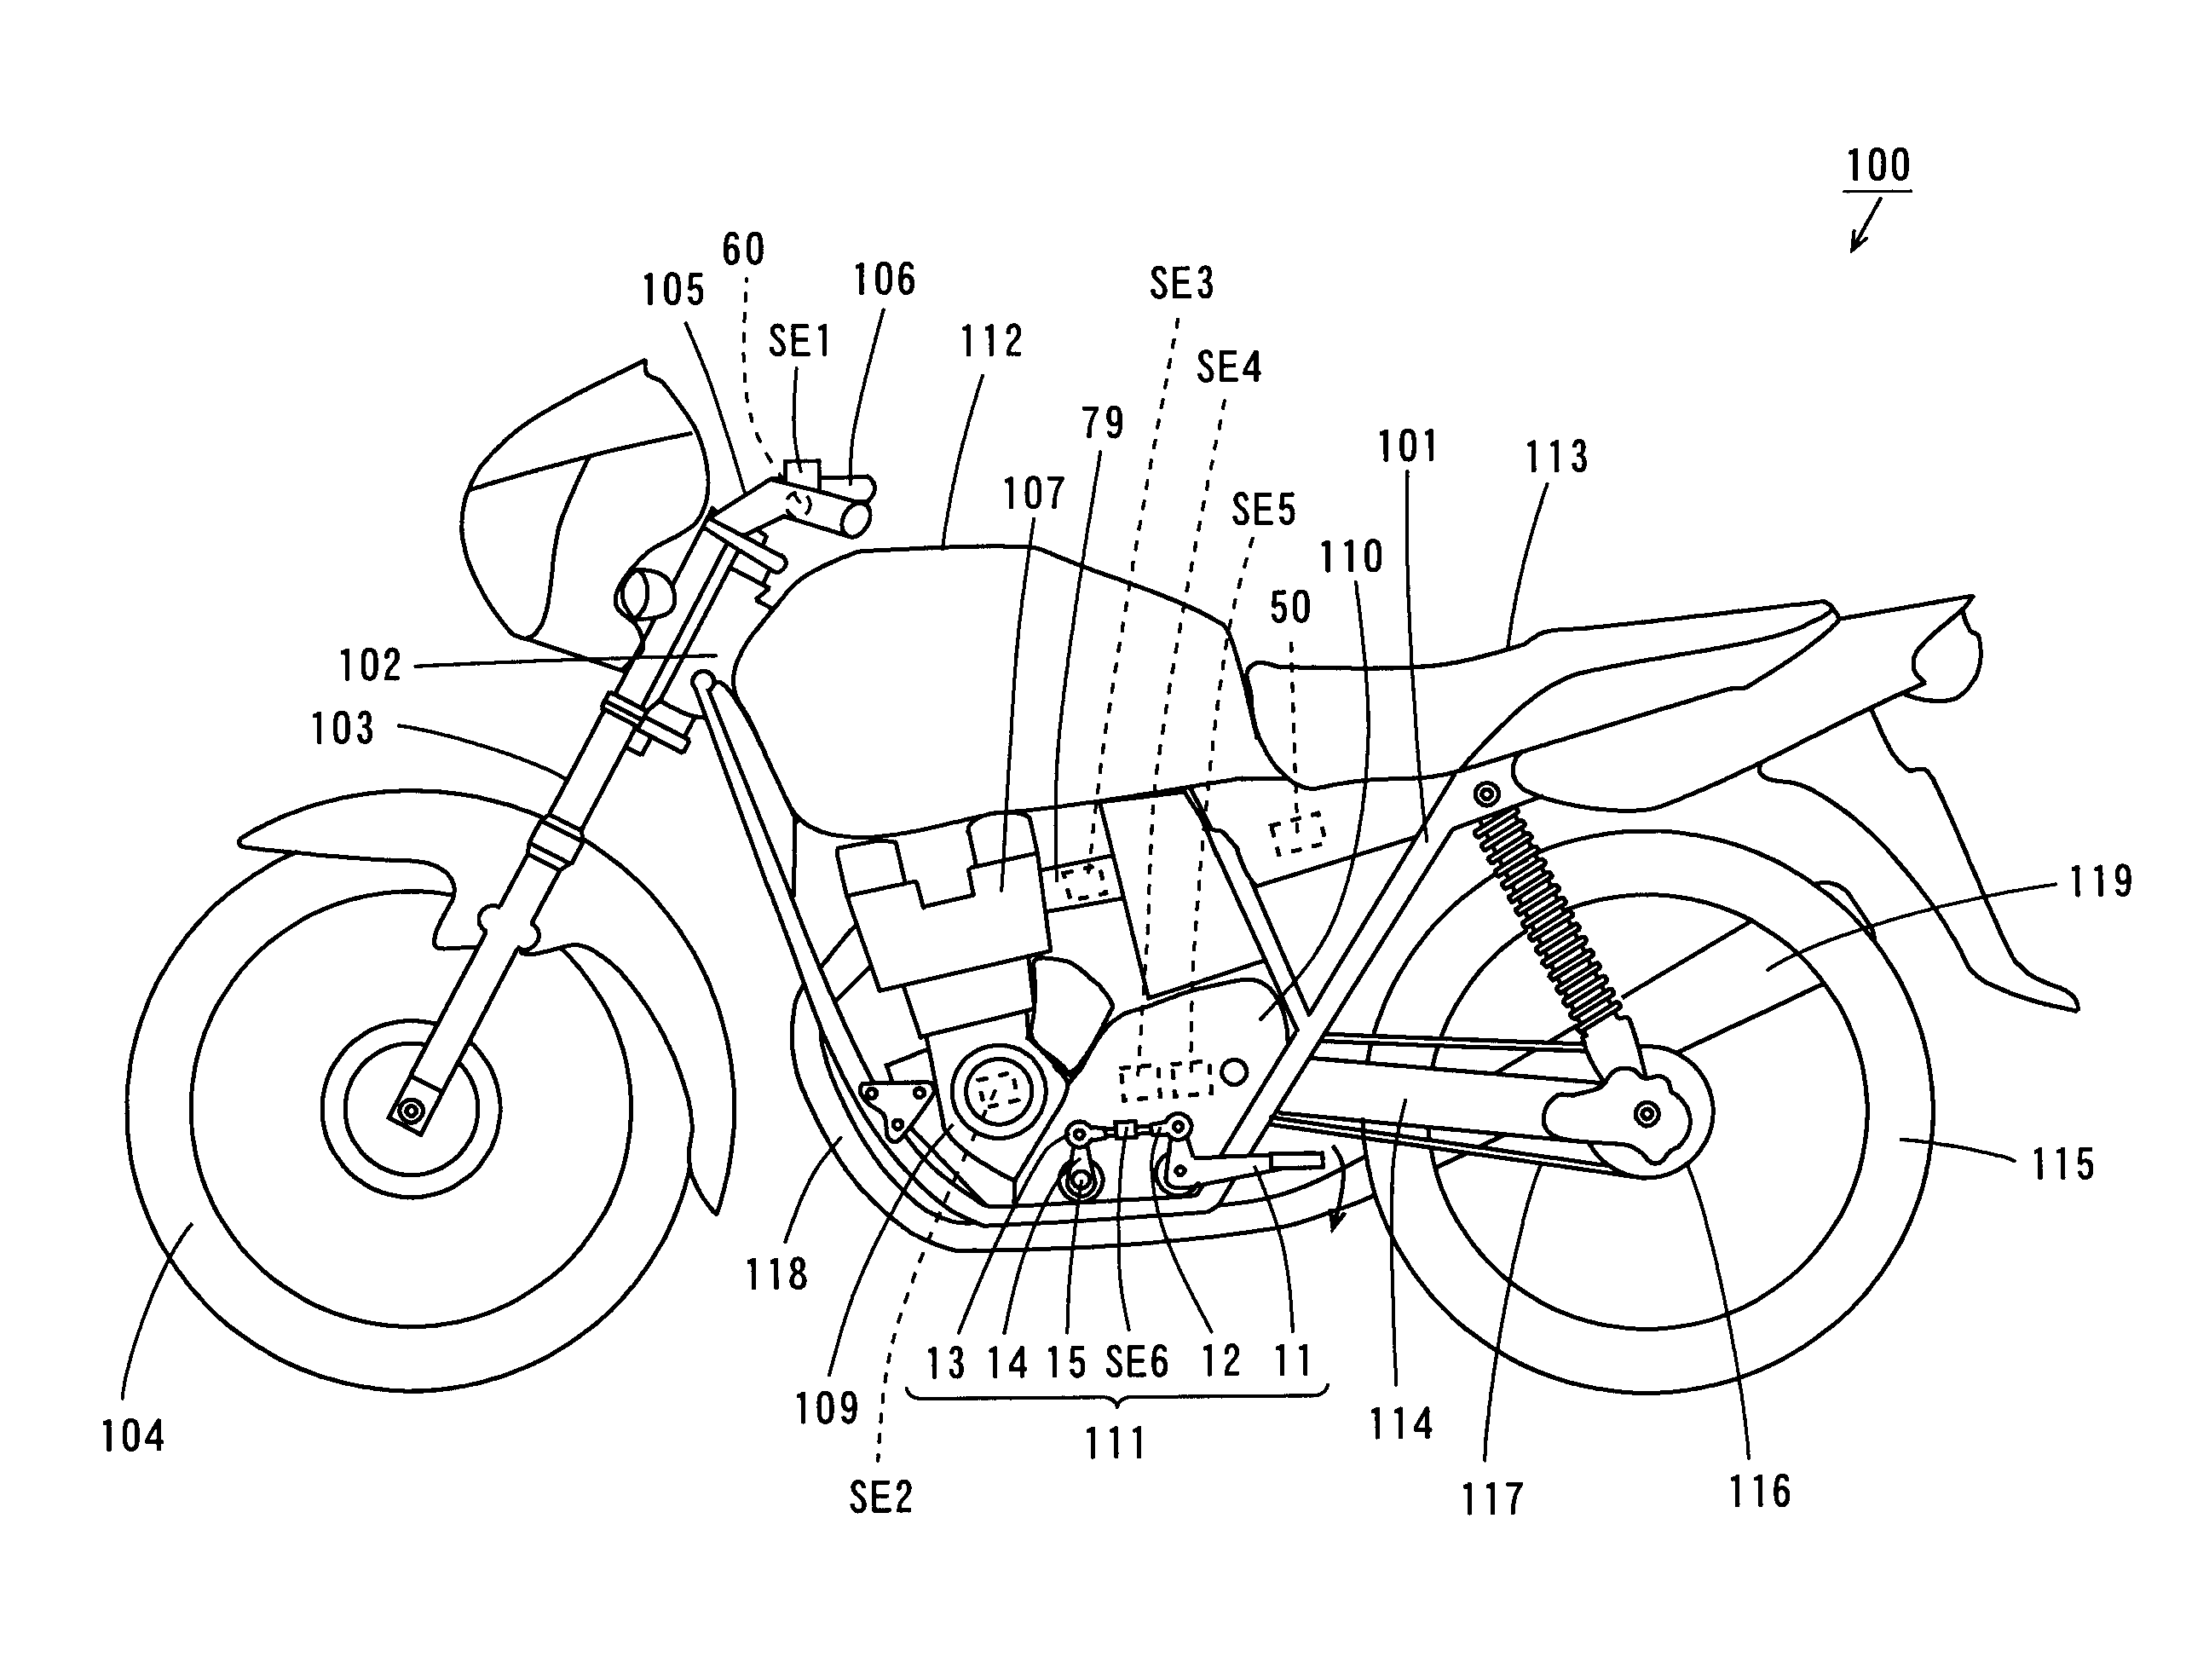 Control system and vehicle